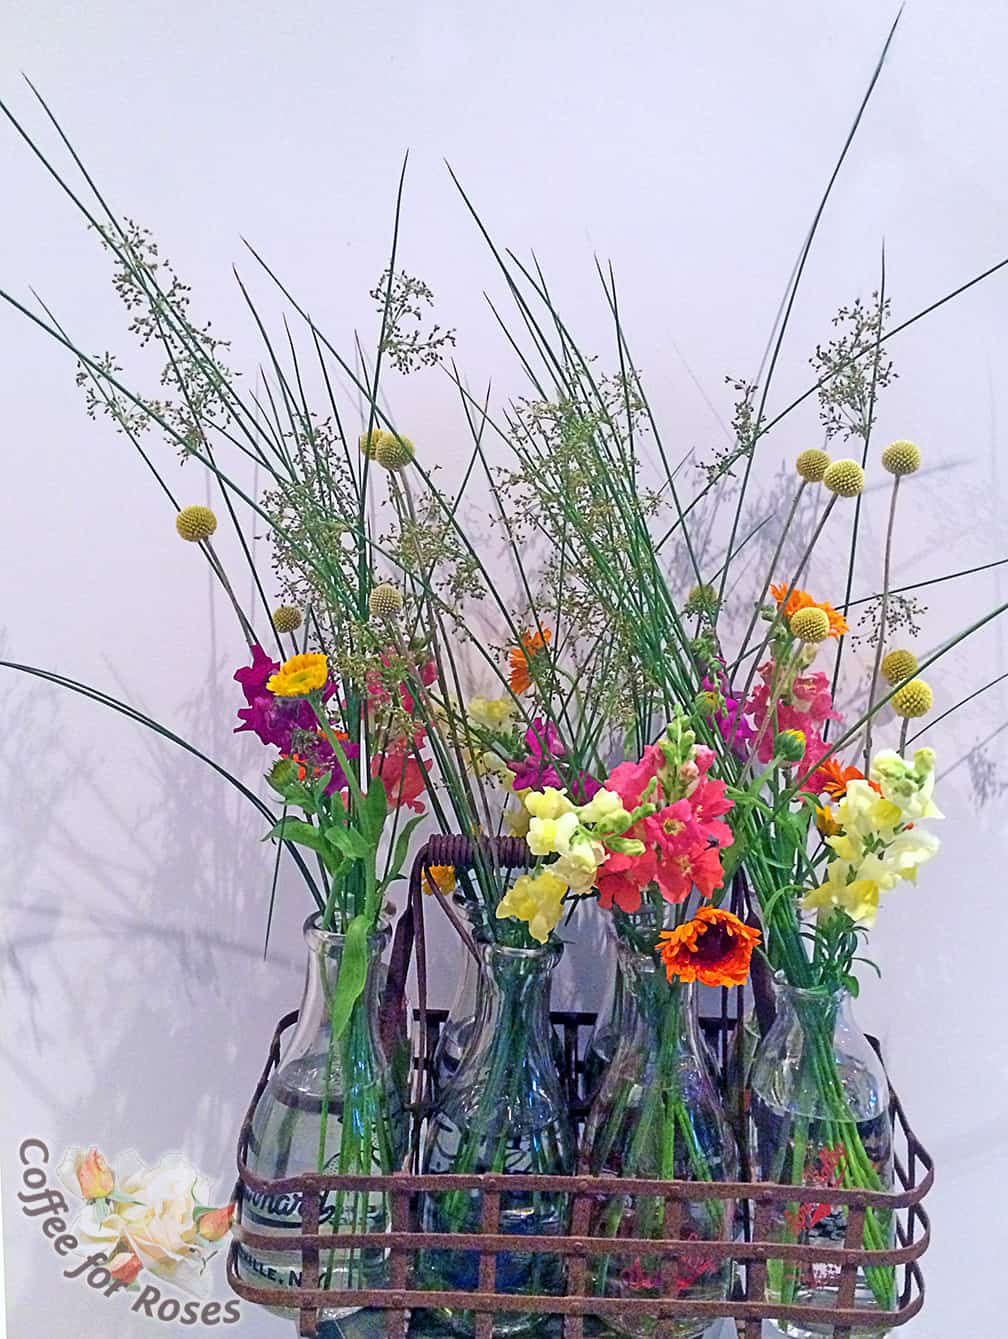 I put together a few arrangements before the wedding day too. I love how the rush (Juncus) looks in this milk-bottle display.